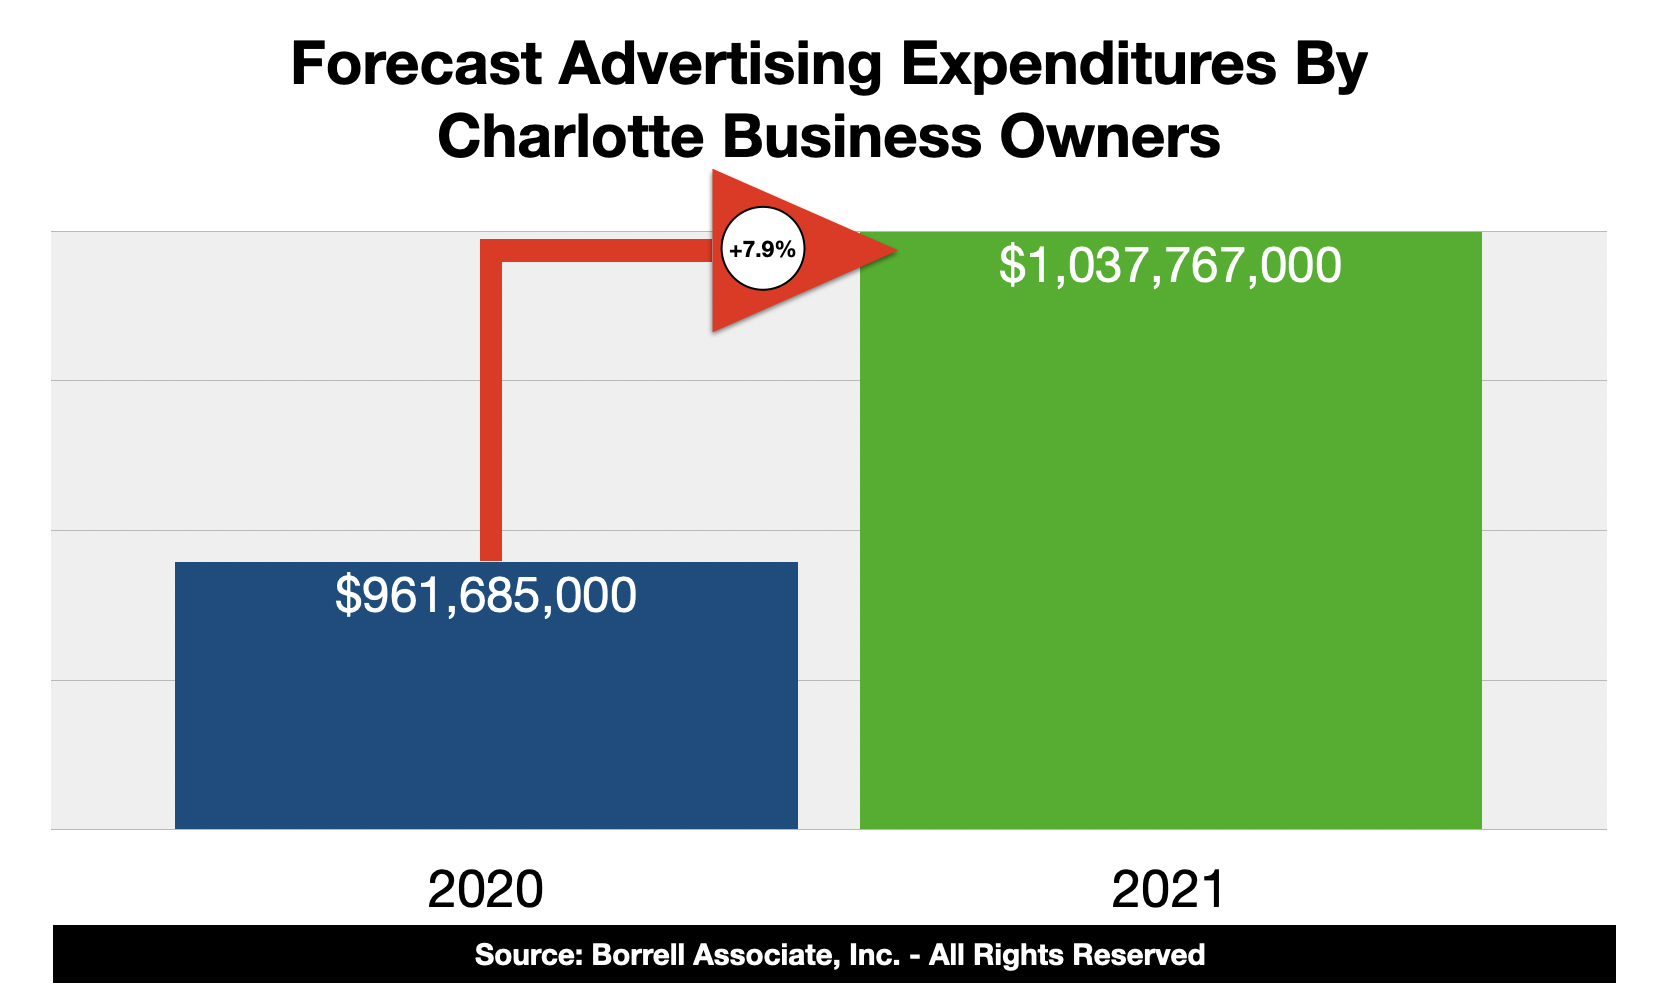 Advertising Expenditures in Charlotte 2021